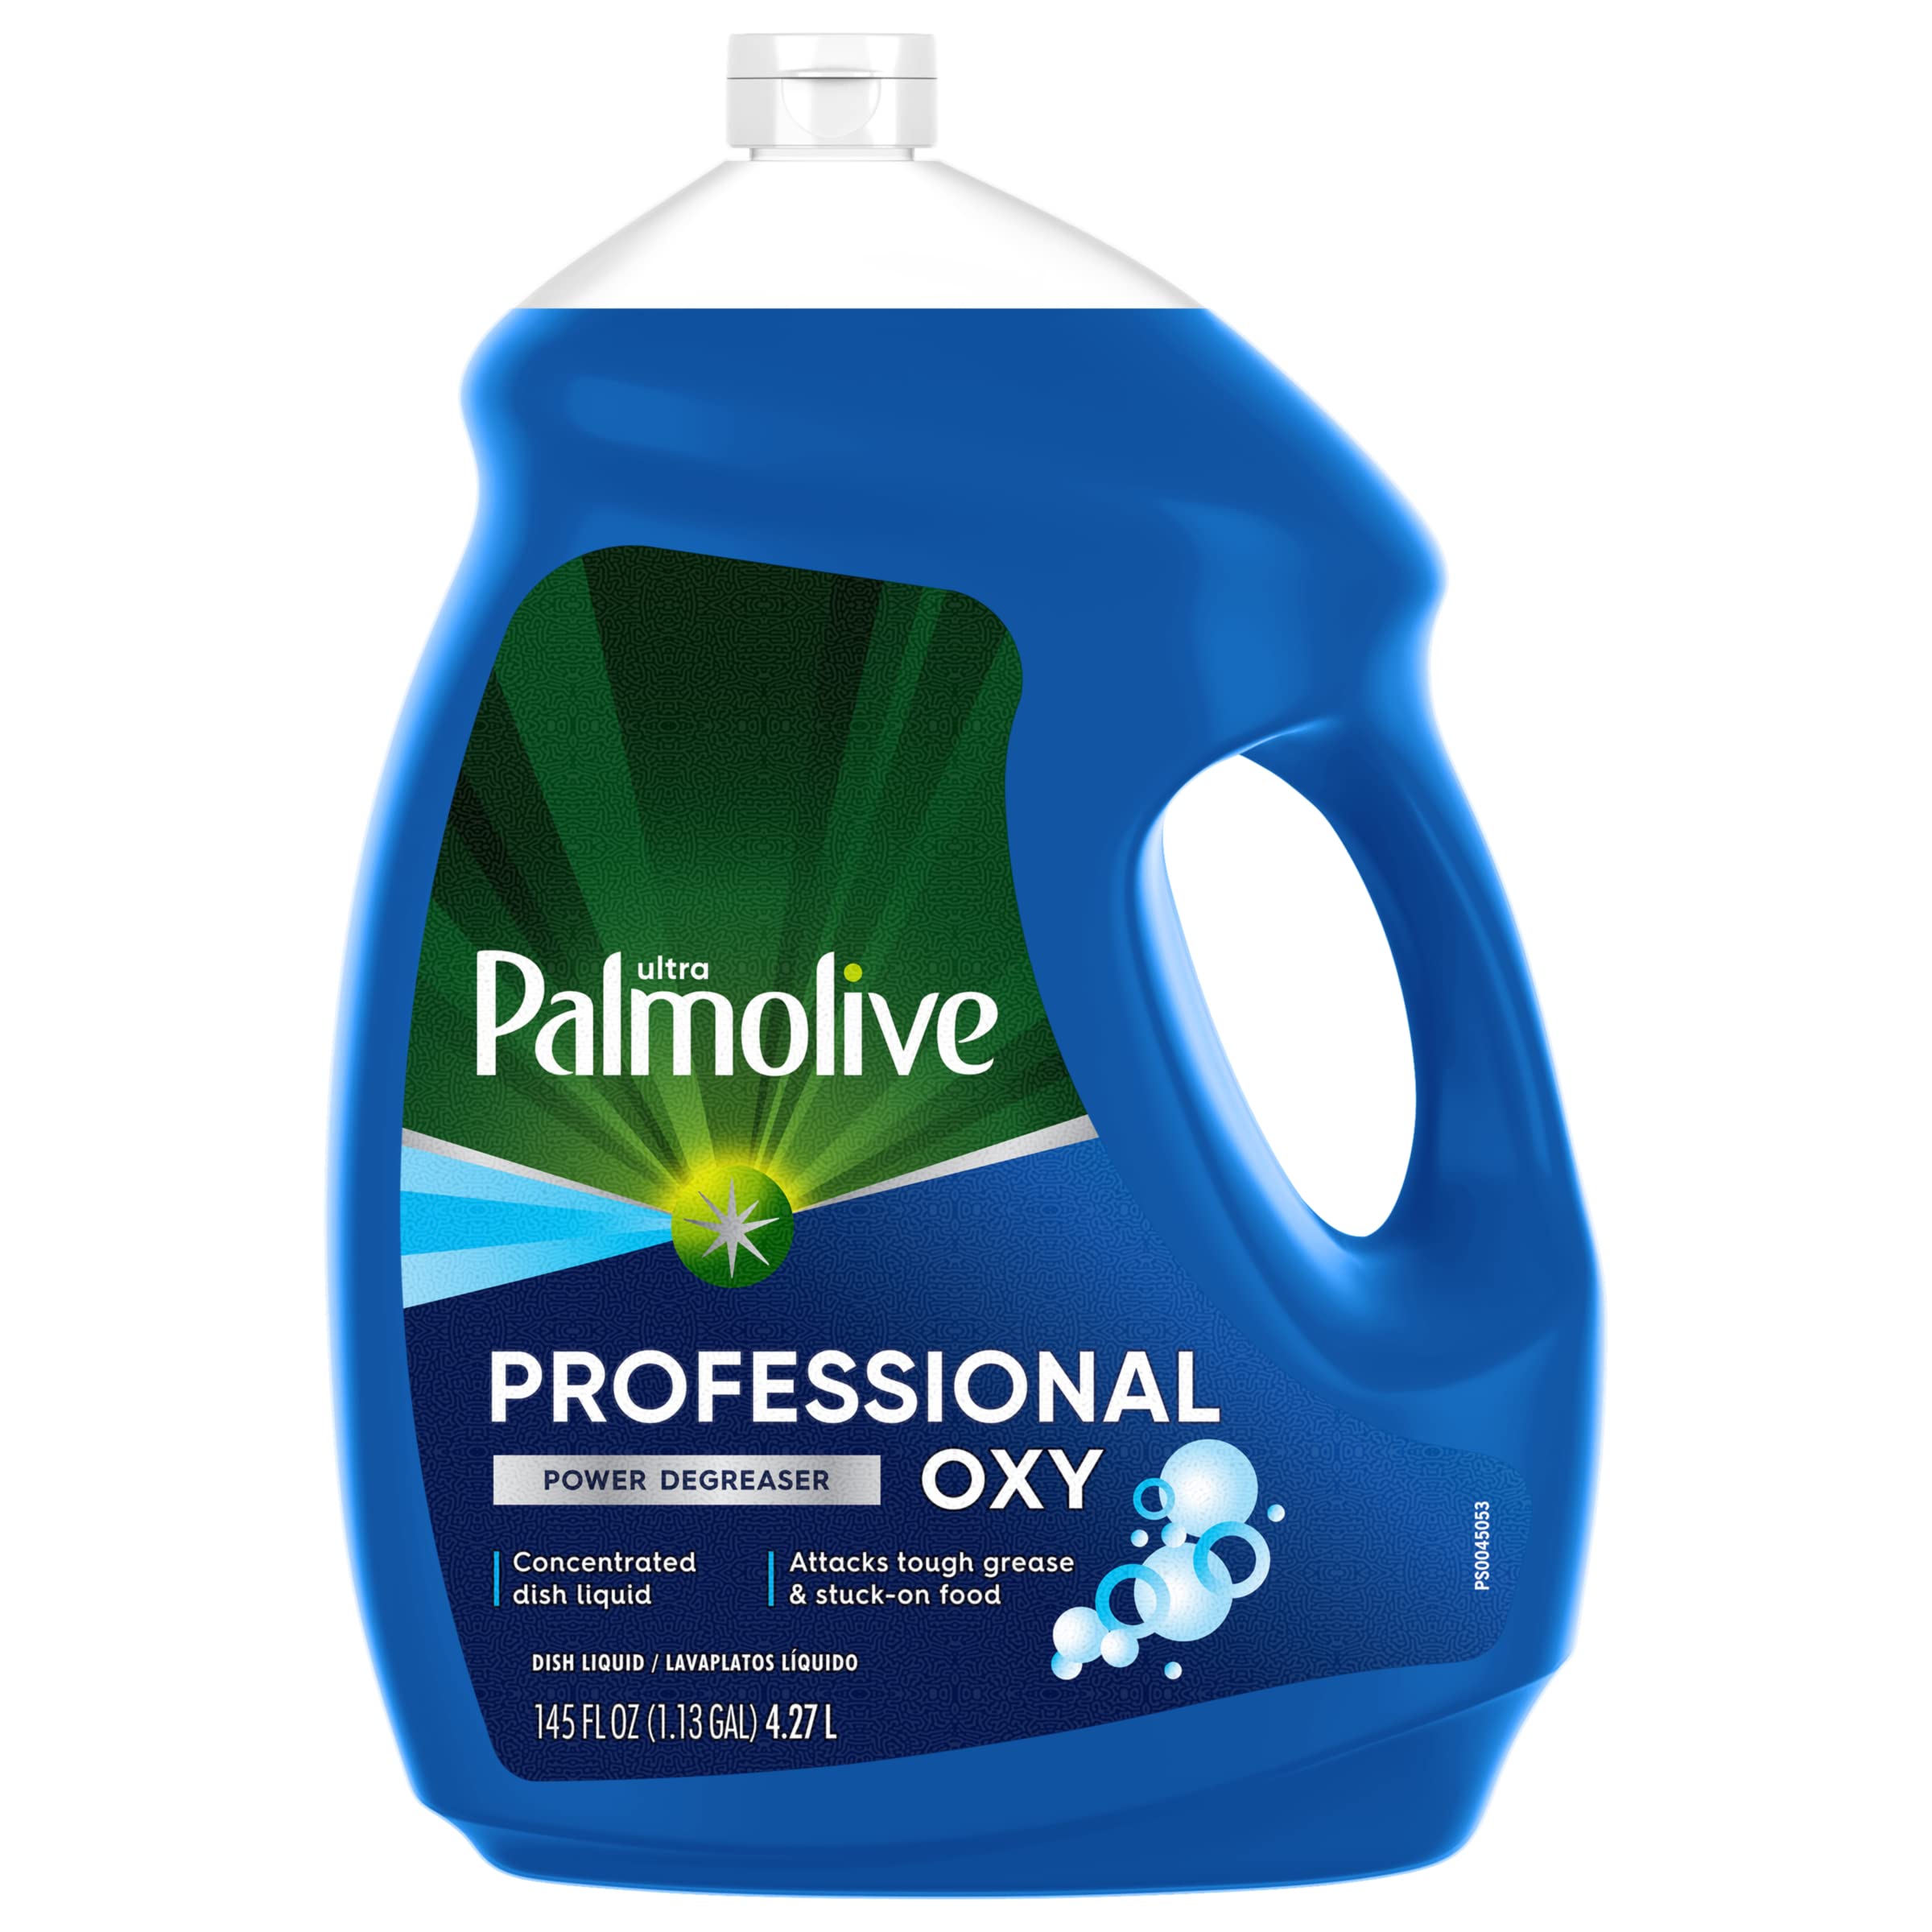 Palmolive Professional Dishwashing Liquid Dish Soap, Oxy Power Degreaser - 145 Fluid Ounce(Pack of 4)